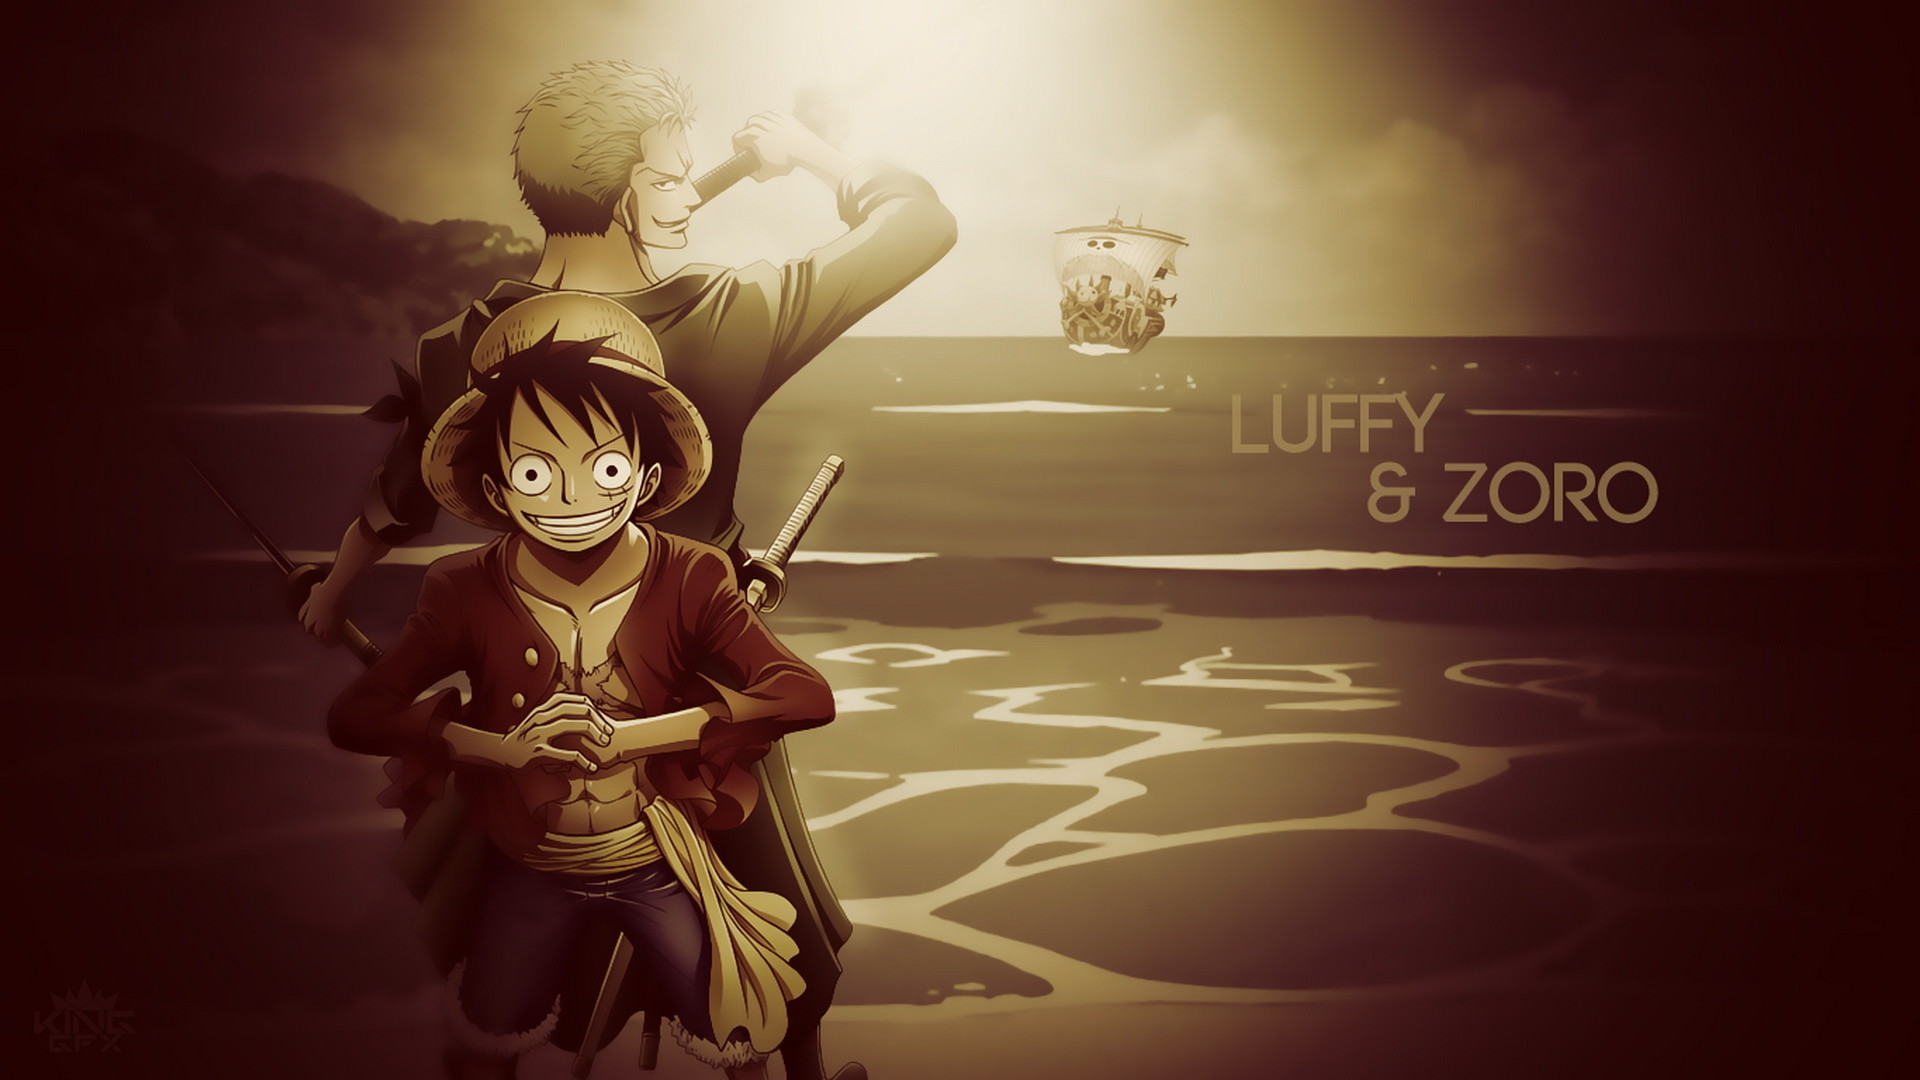 1920x1080 One Piece Luffy and Zoro After 2 Years Wallpaper